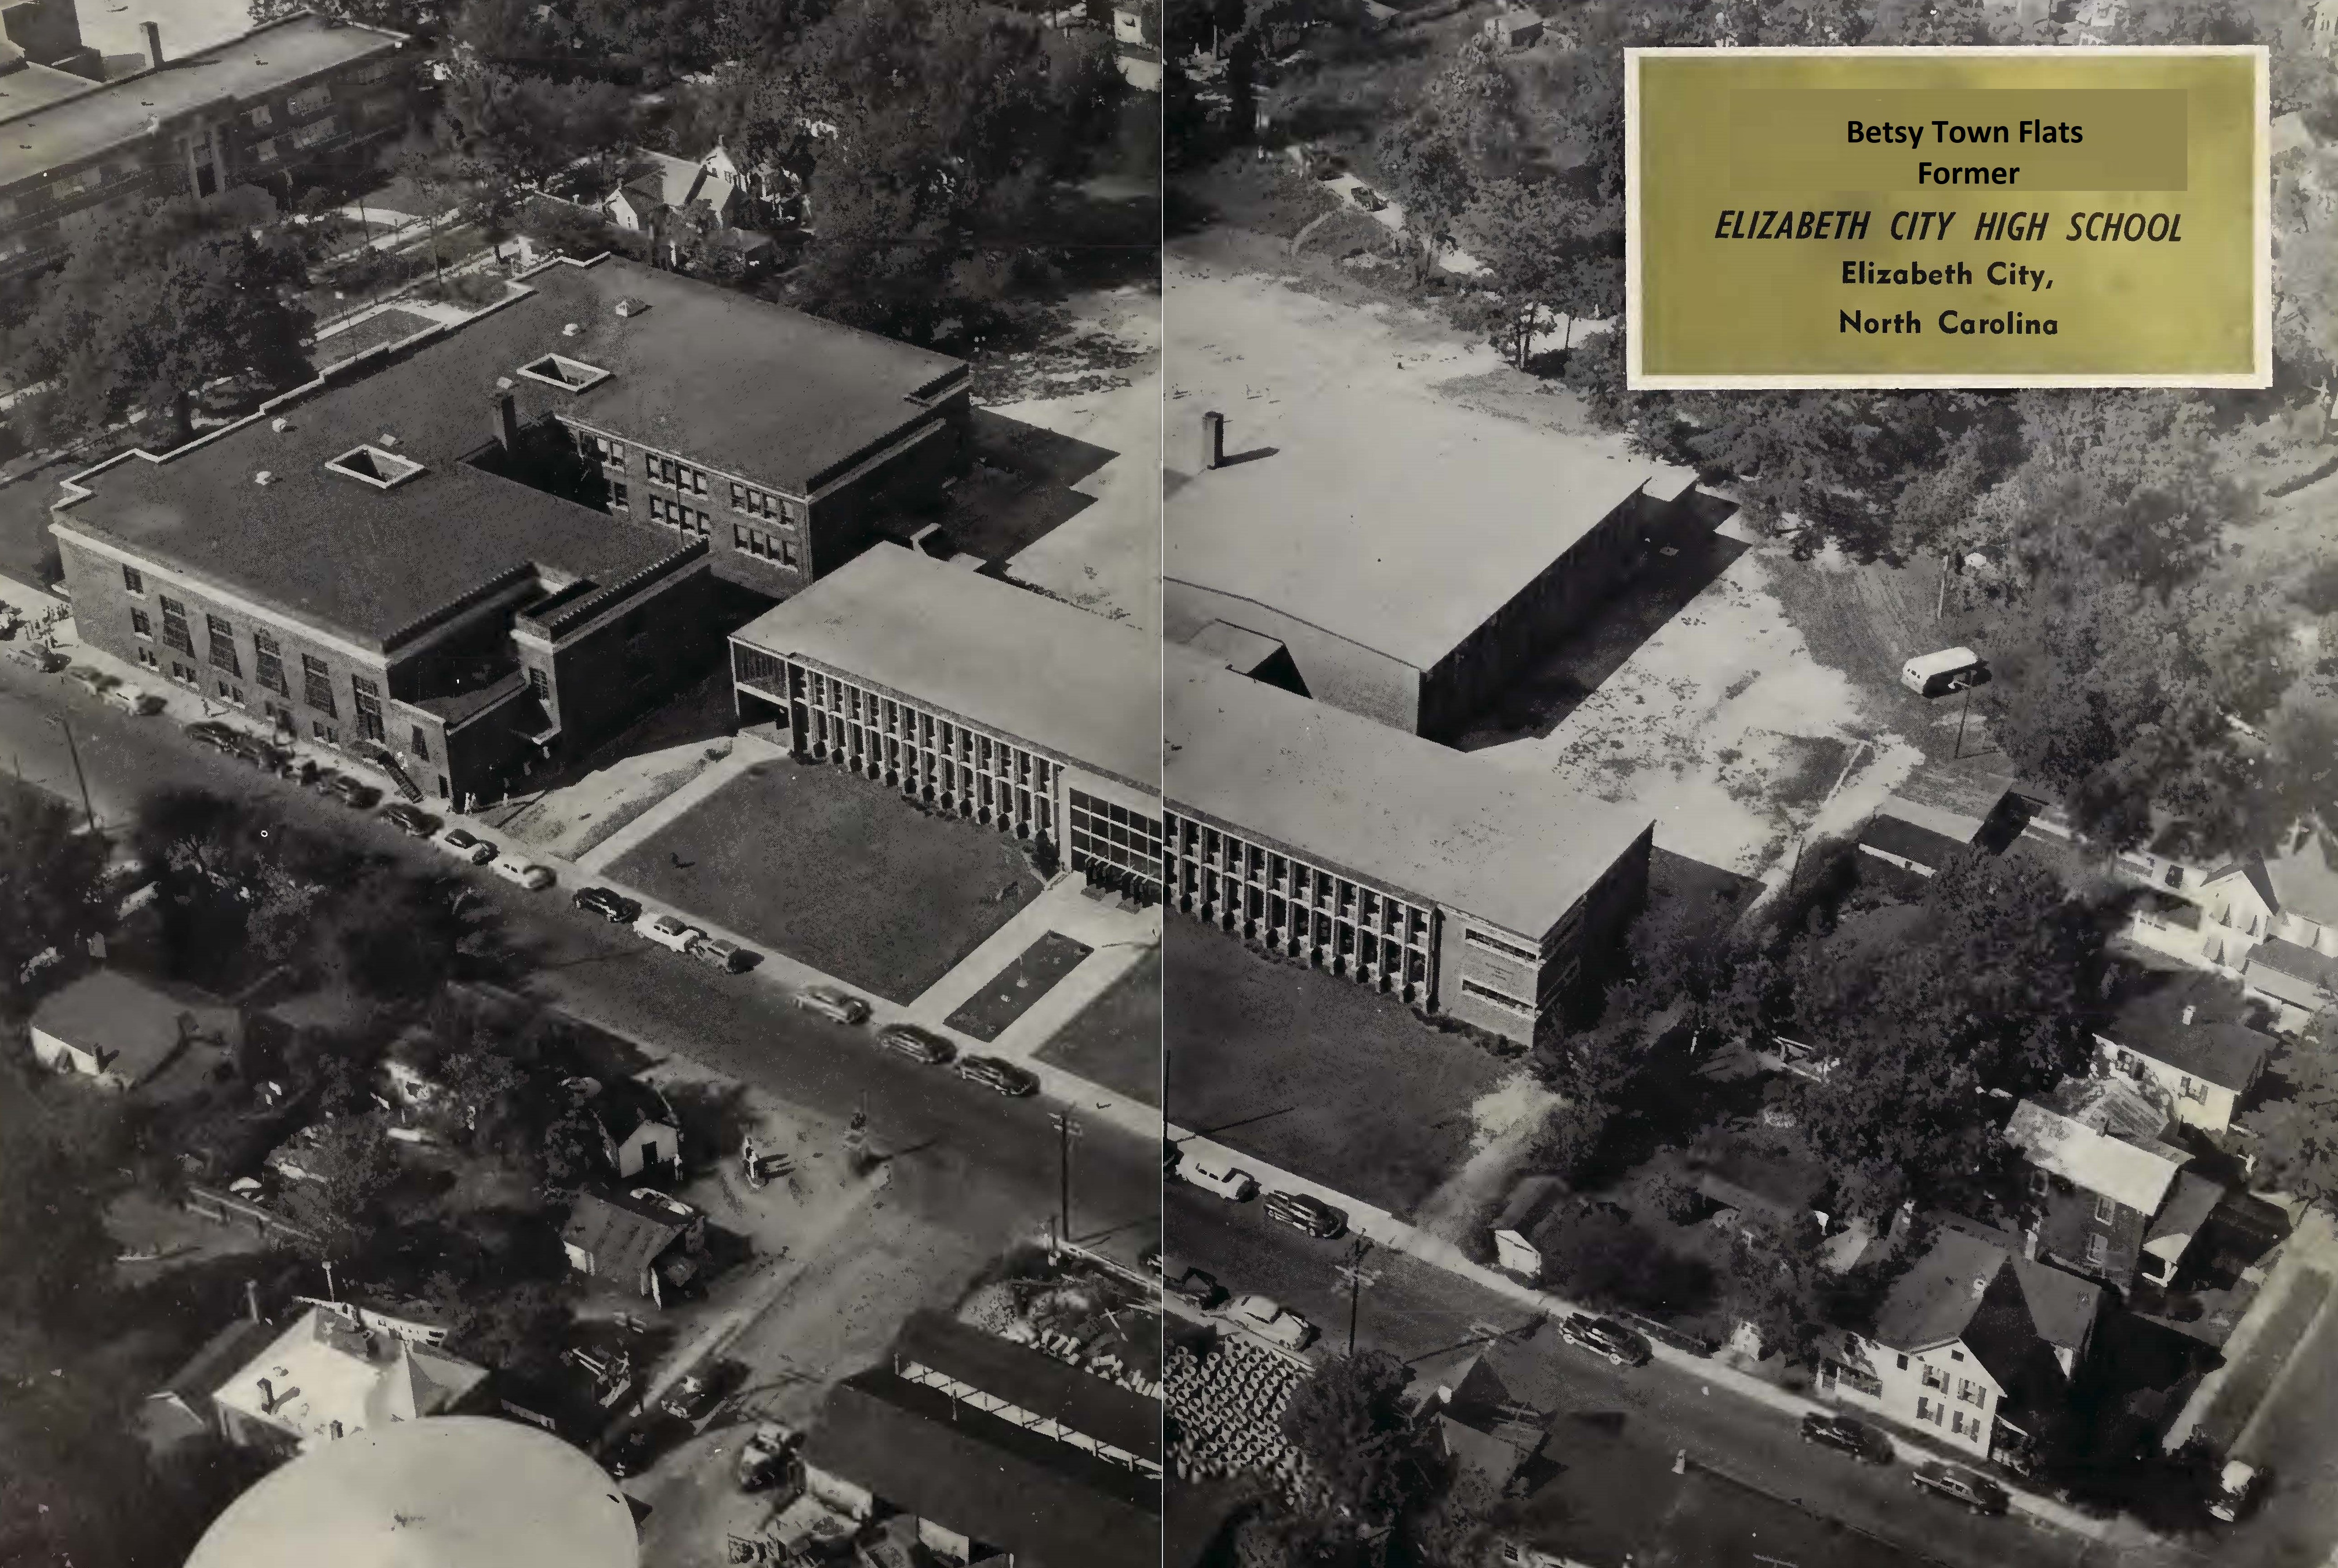 Betsy Town Flats 1955 Aerial Elevation Photo